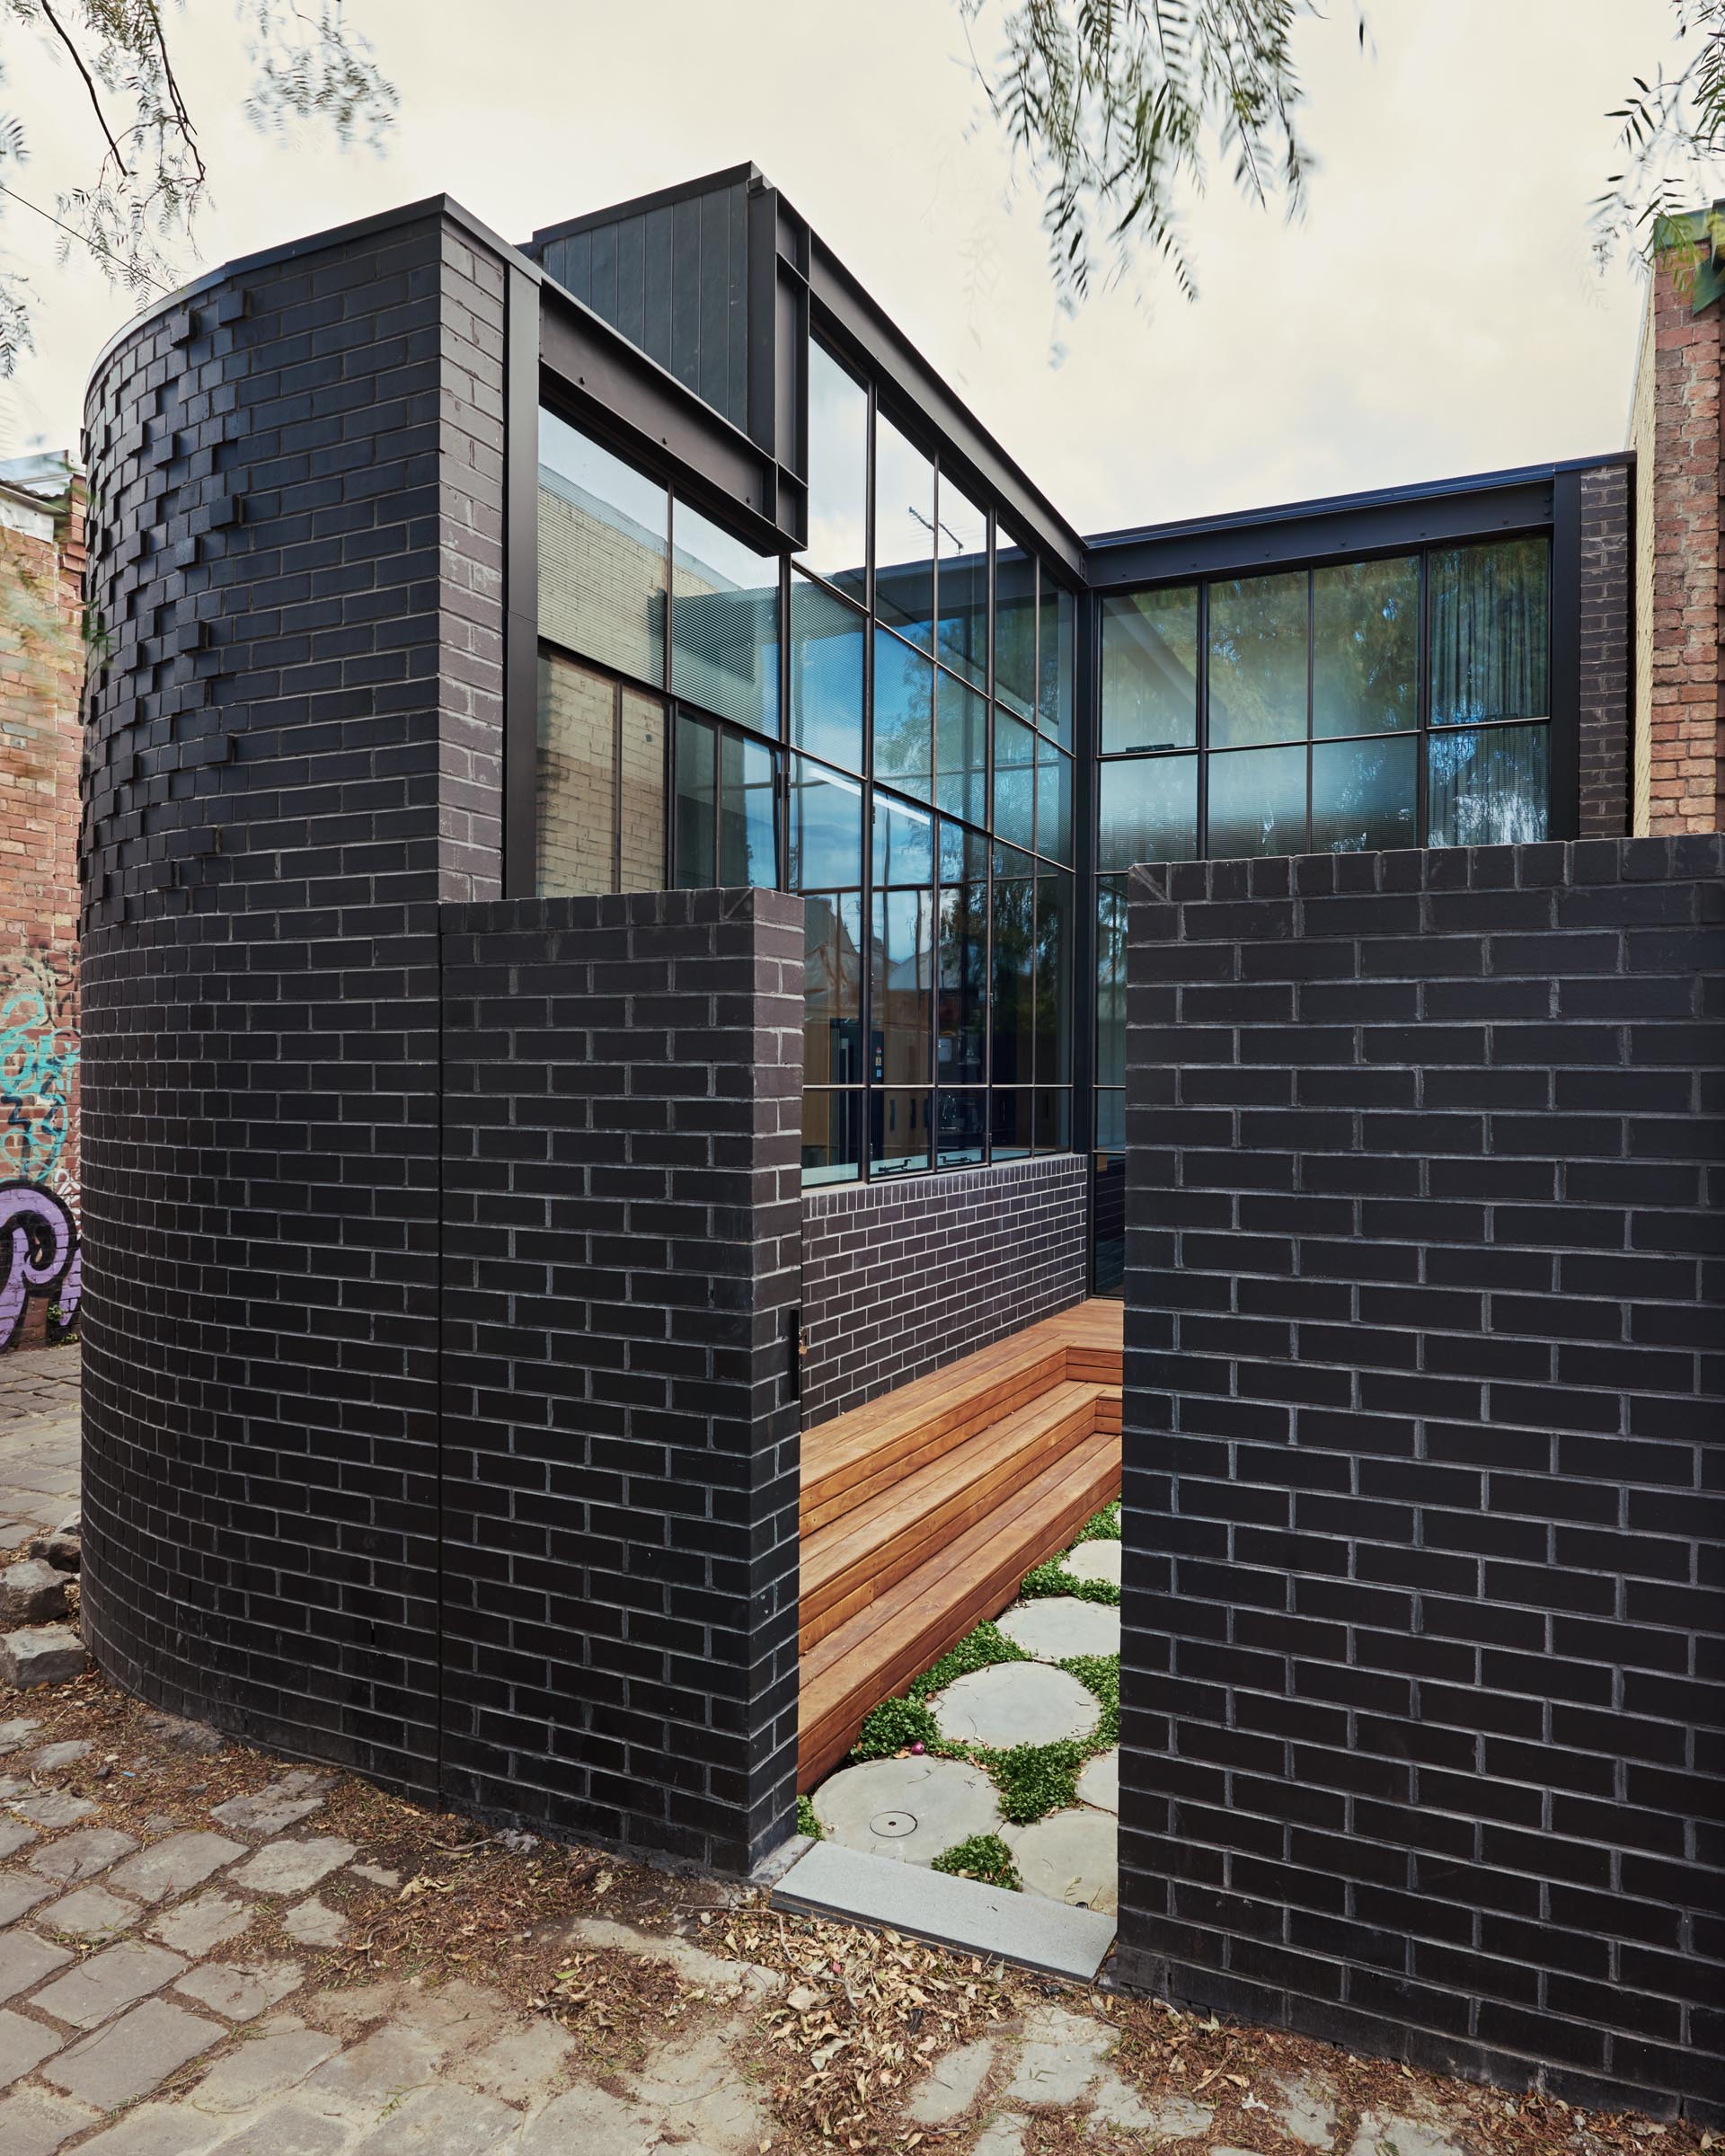 The newly built rear of this traditional Australian home can be seen down the lane at the side of the home and features a black brick that curves around the corner.